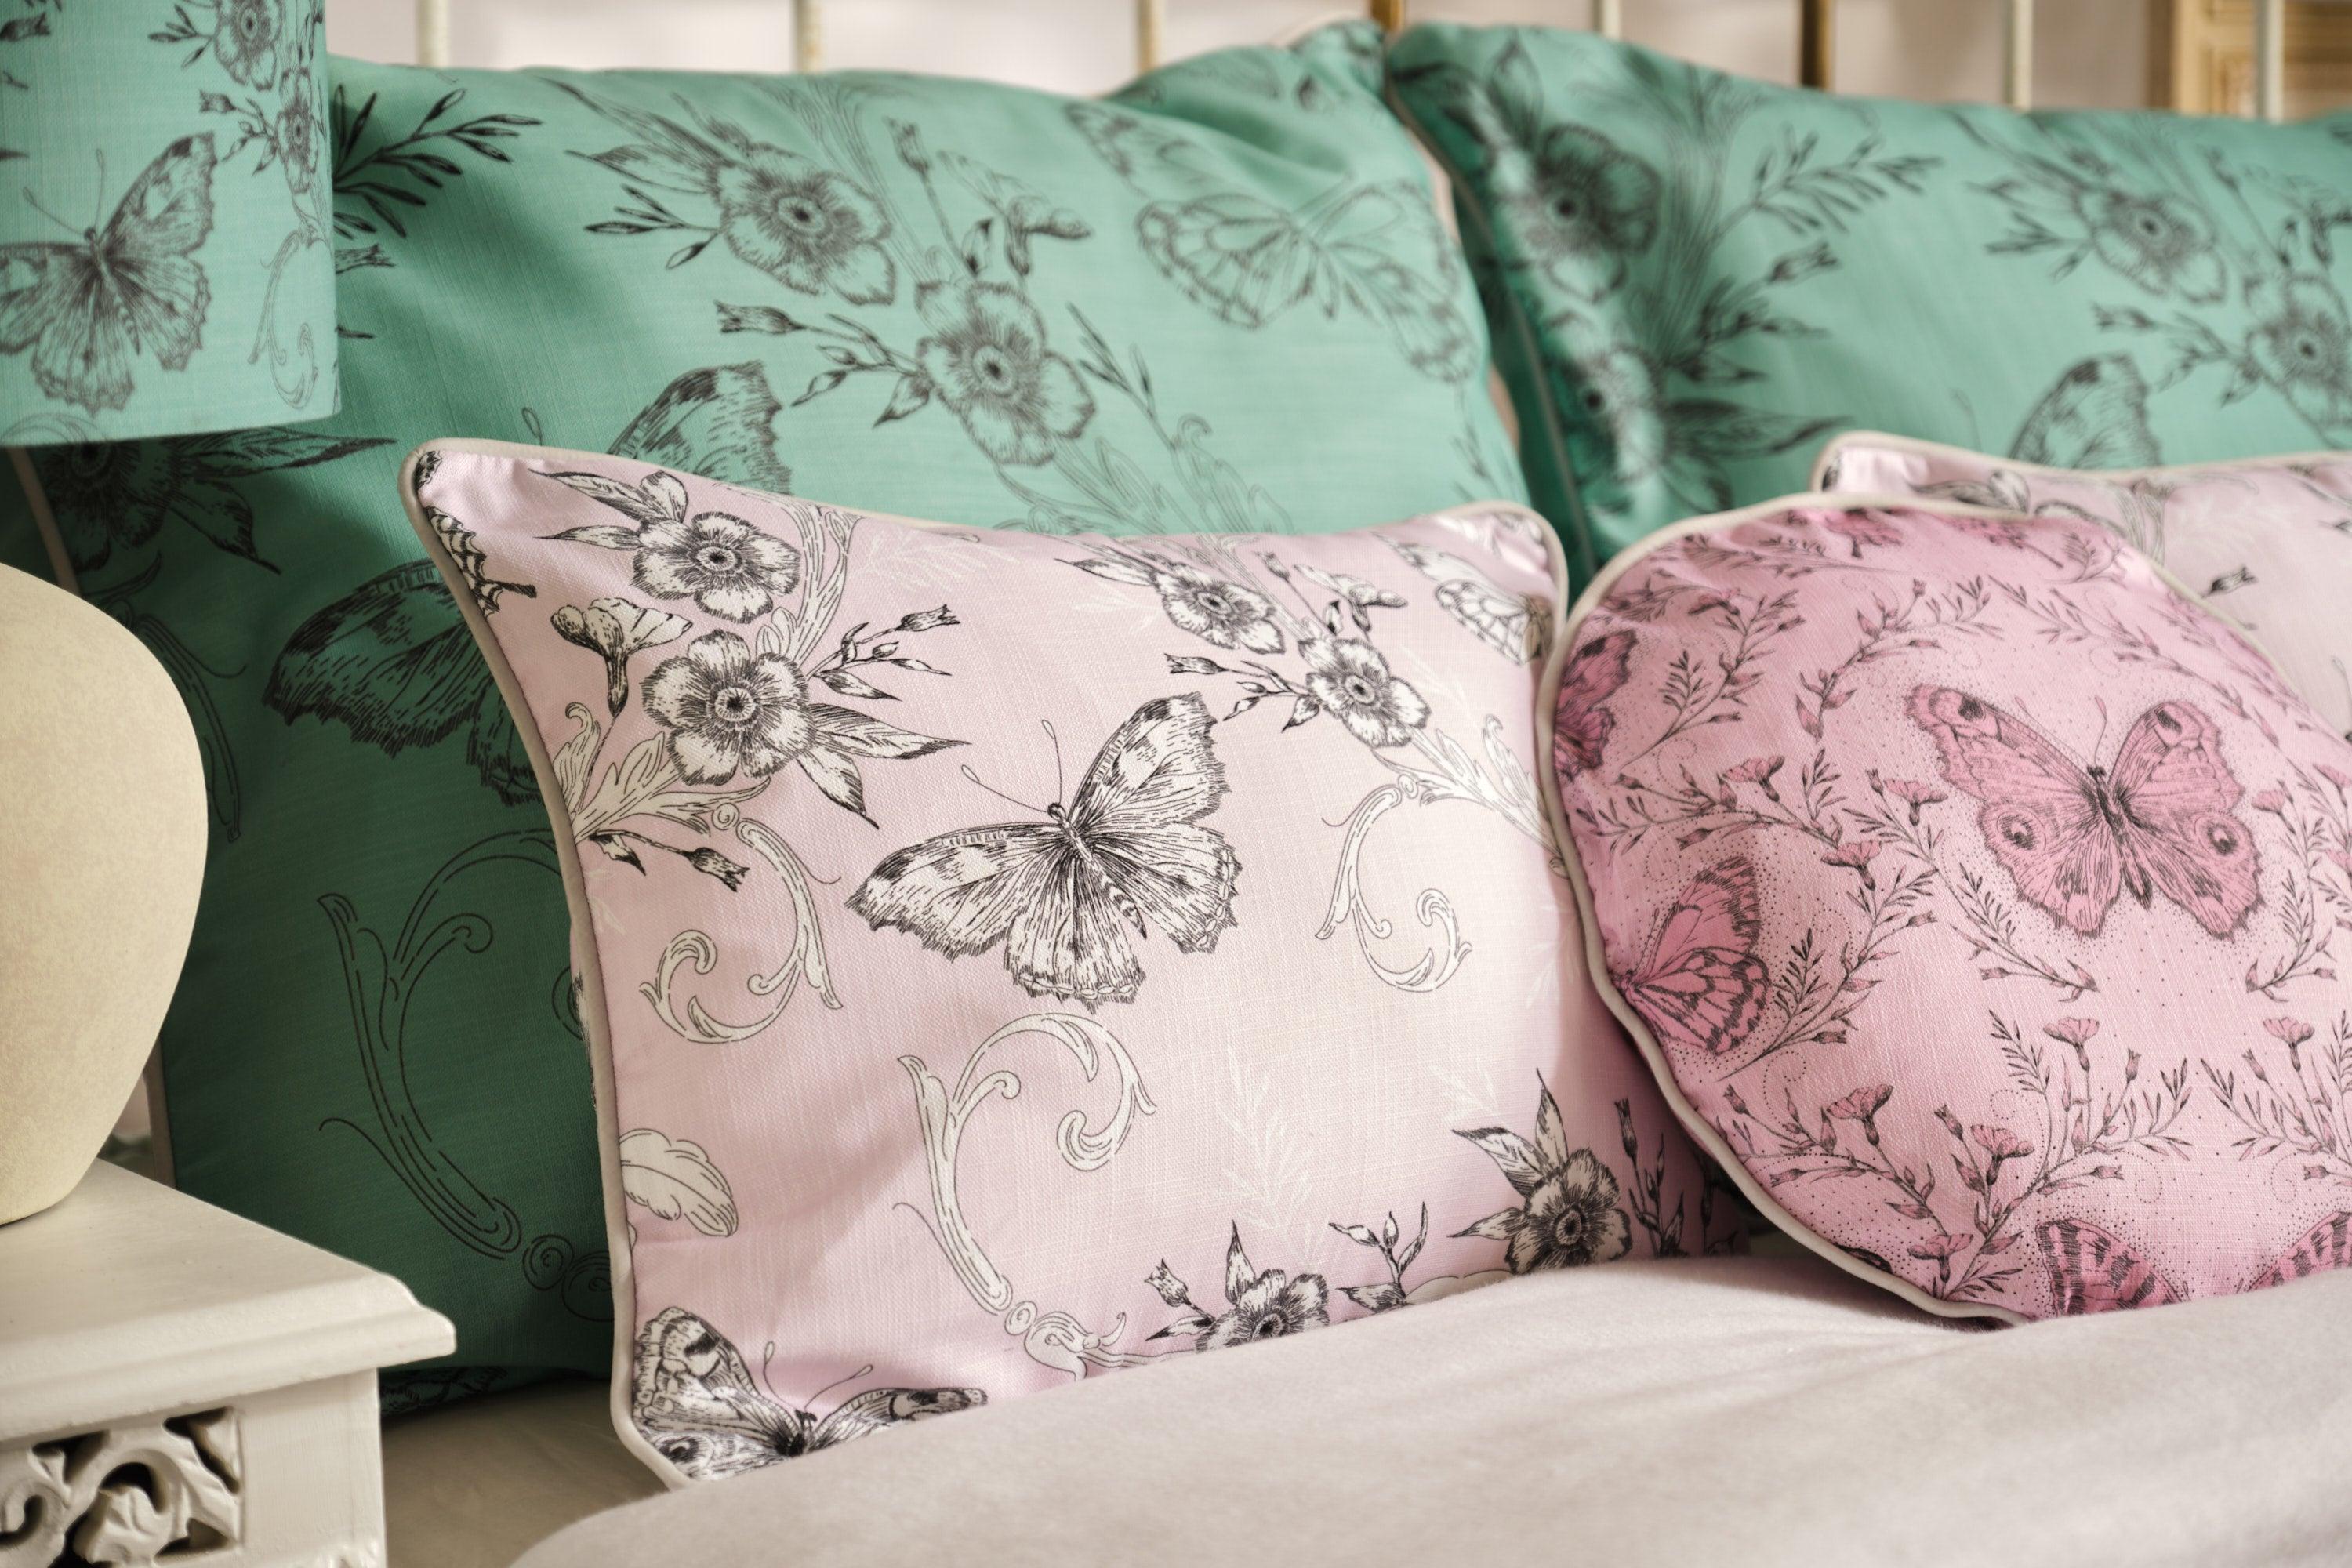 Trailing Butterfly Mint Green Landscape - House Of Turnowsky Cushion